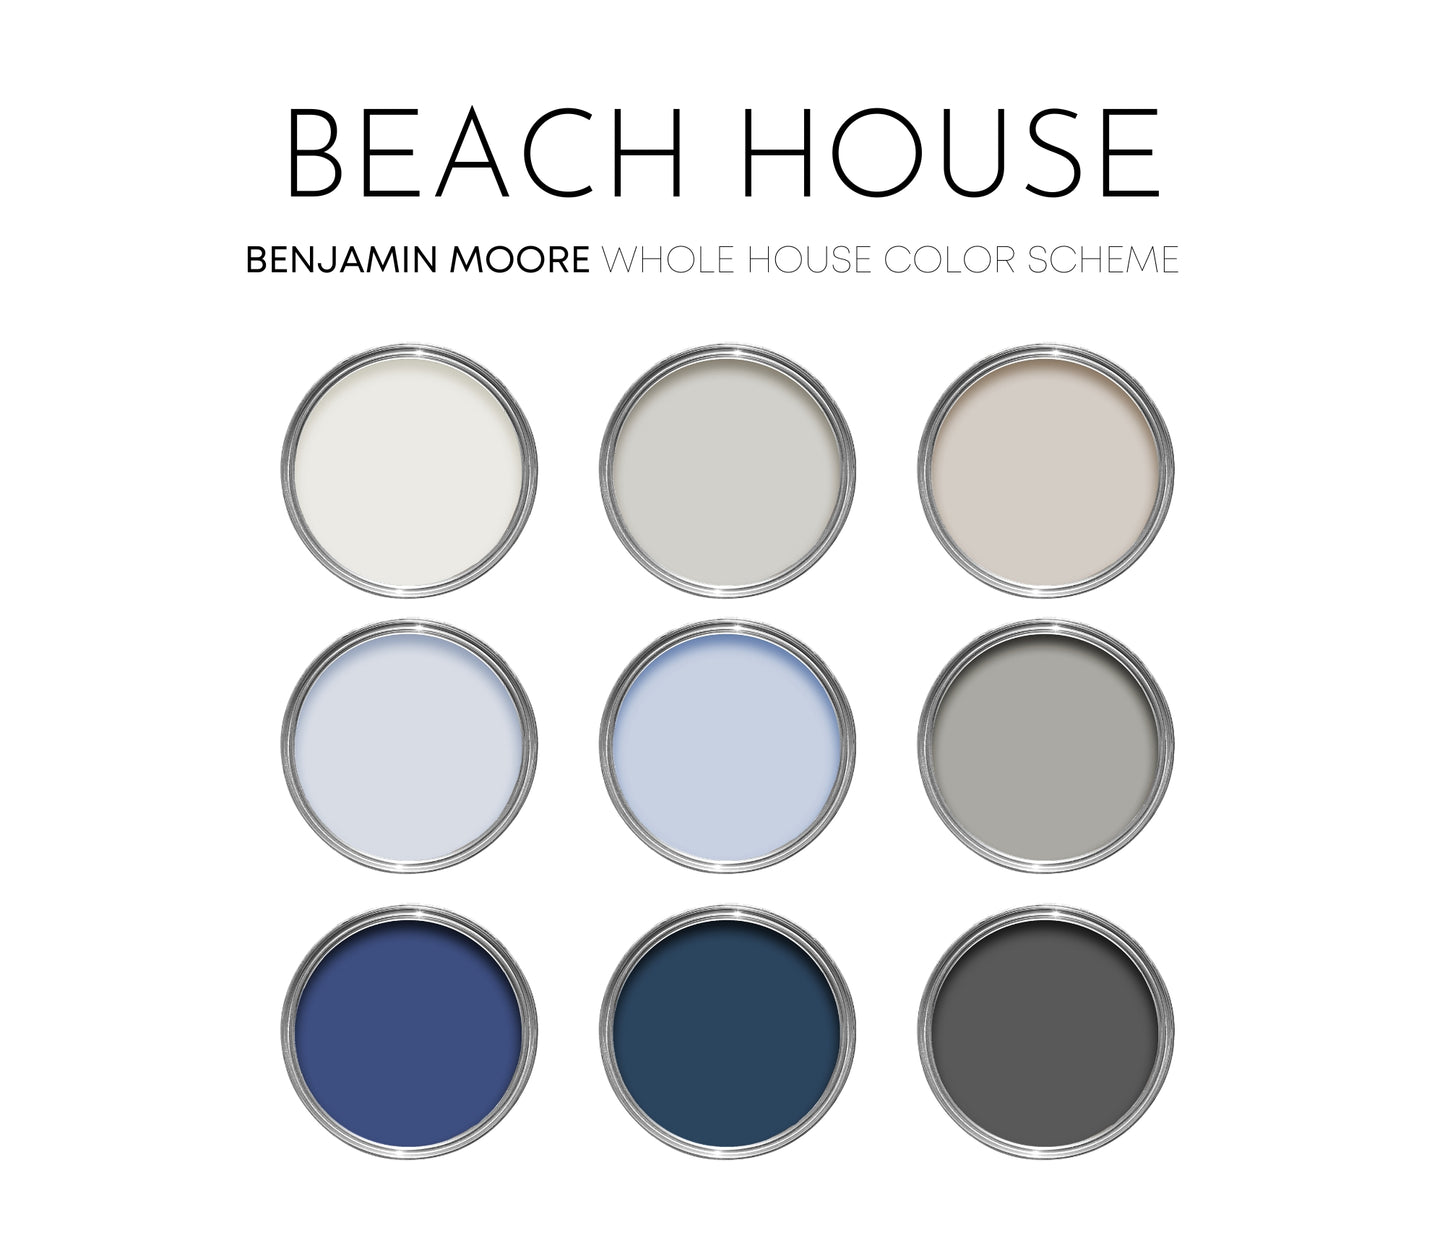 Beach House Benjamin Moore Paint Palette, Interior Paint Colors for Home, Cool Grays, Coastal Colors, White Heron